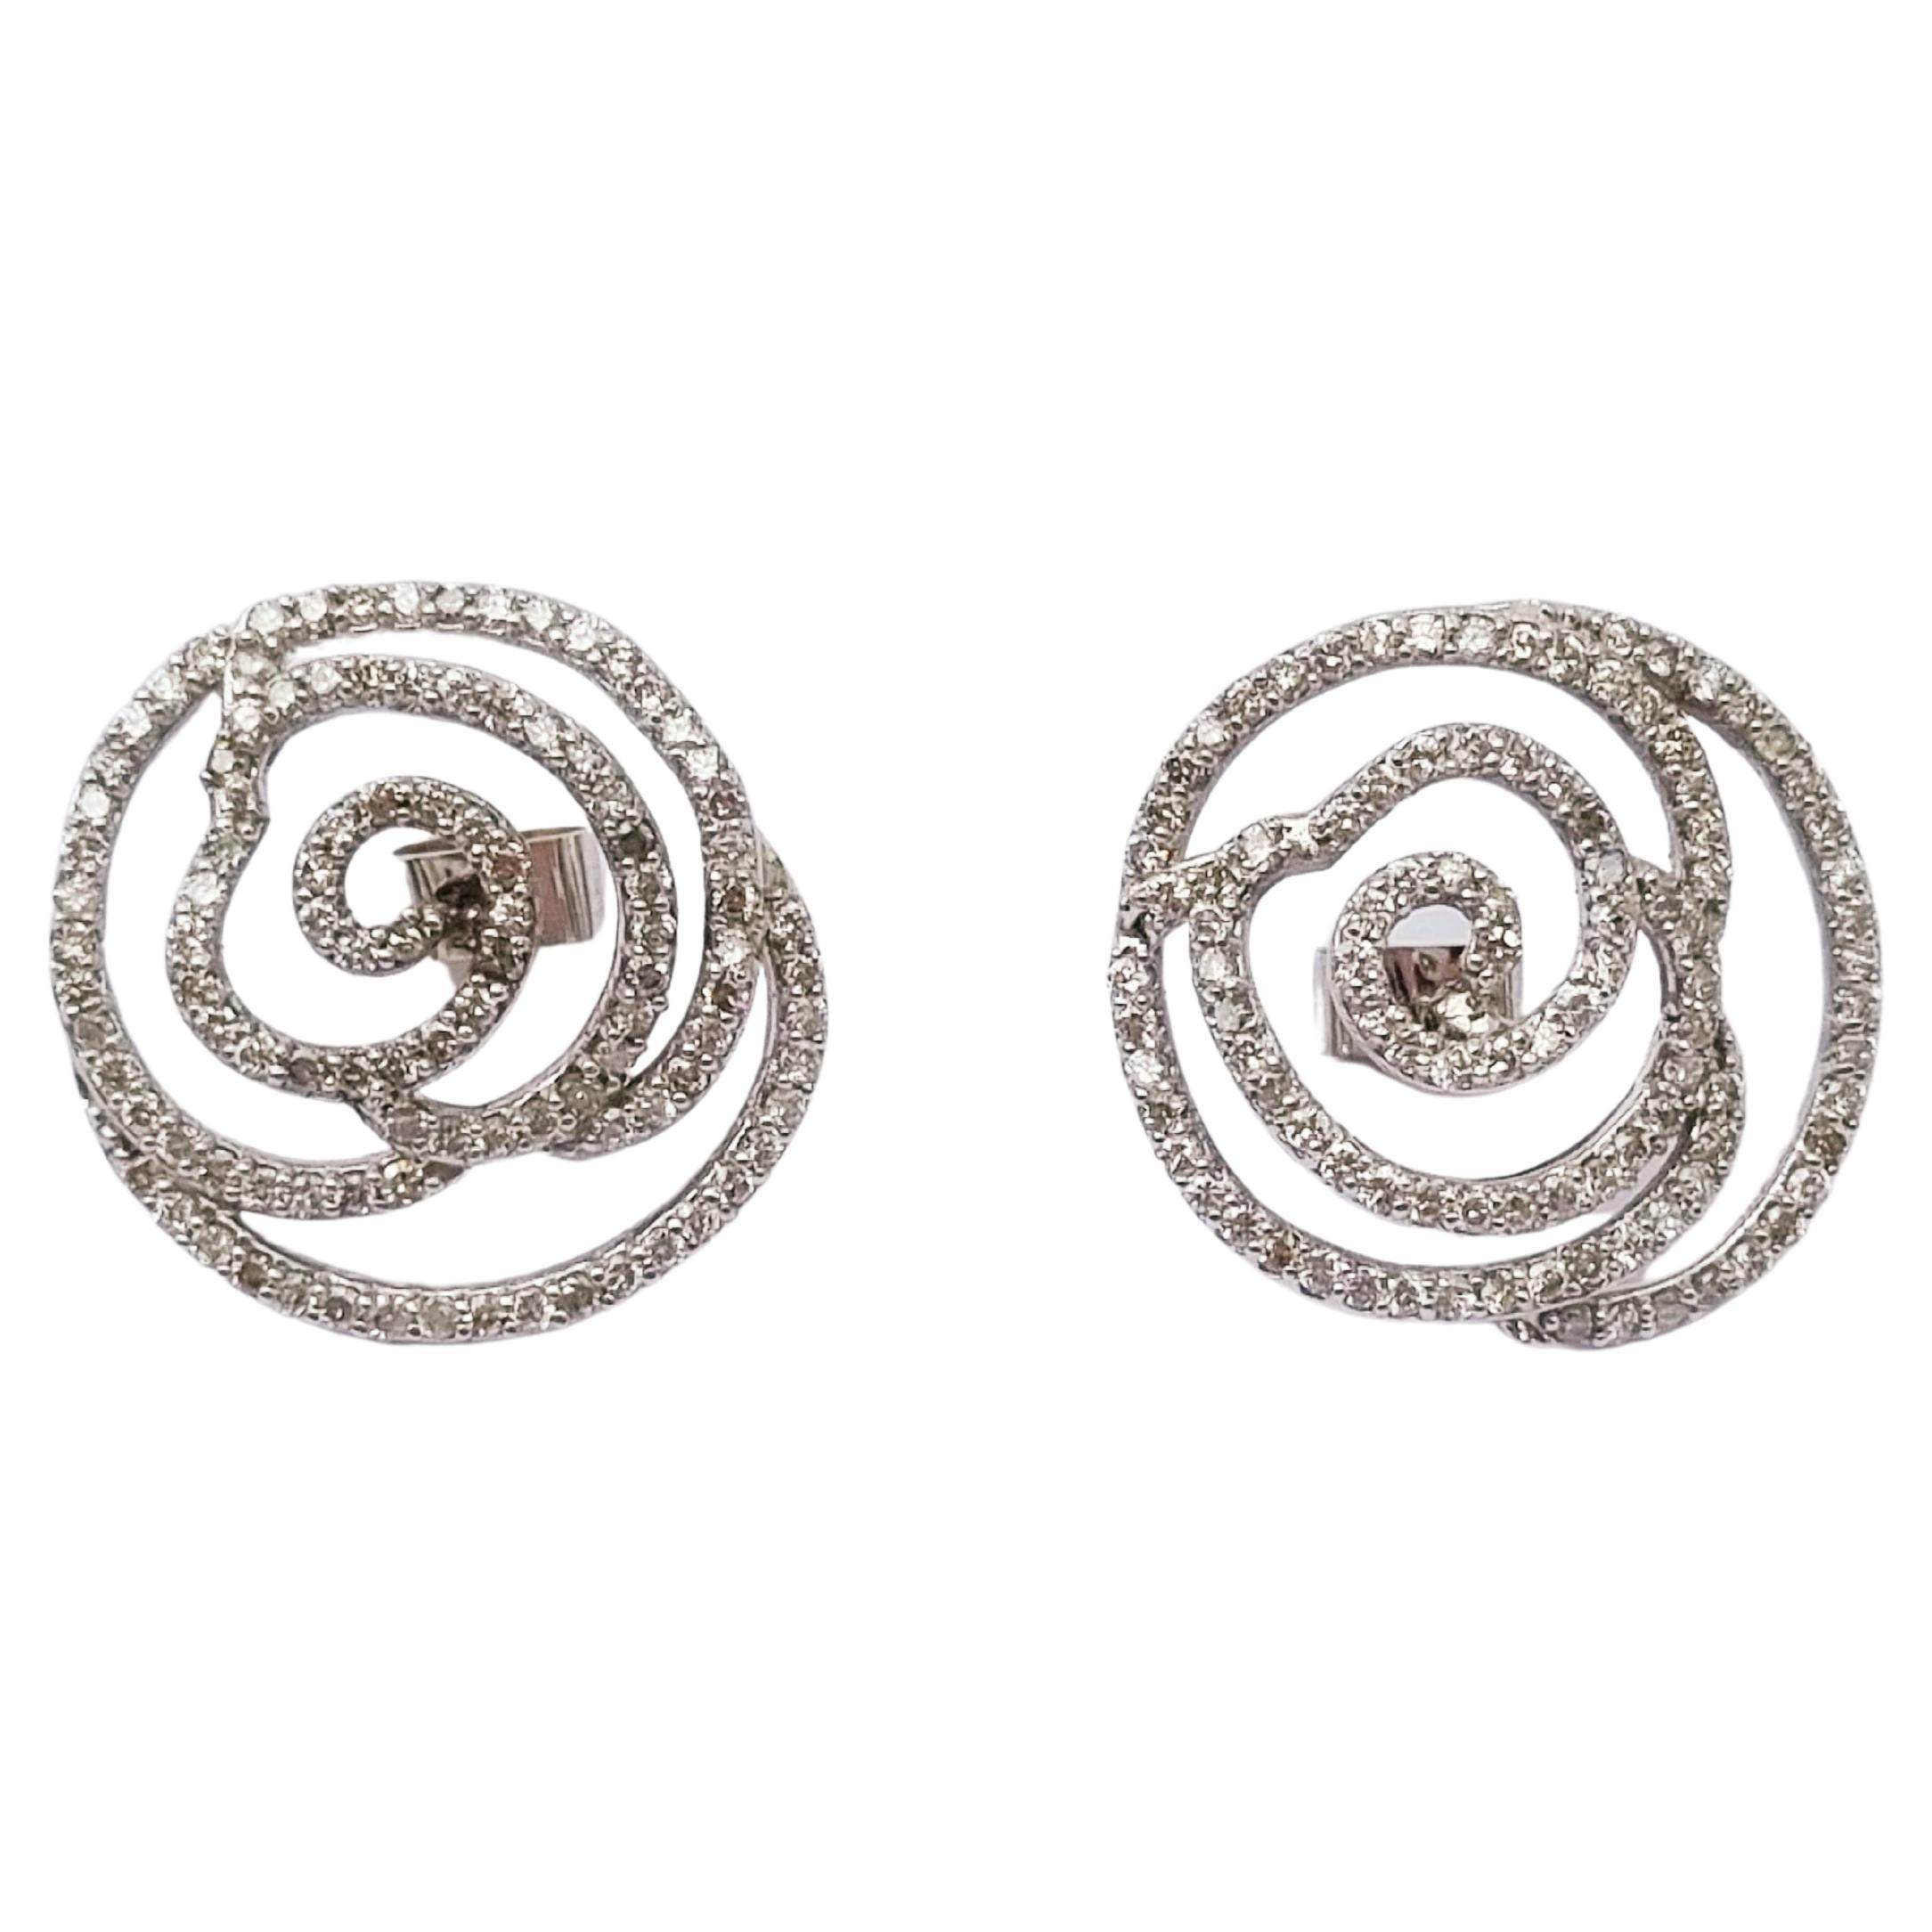 2, 63 Ct Diamonds Pave Earrings, Floral Stud Earrings, 18k Solid White Gold For Sale